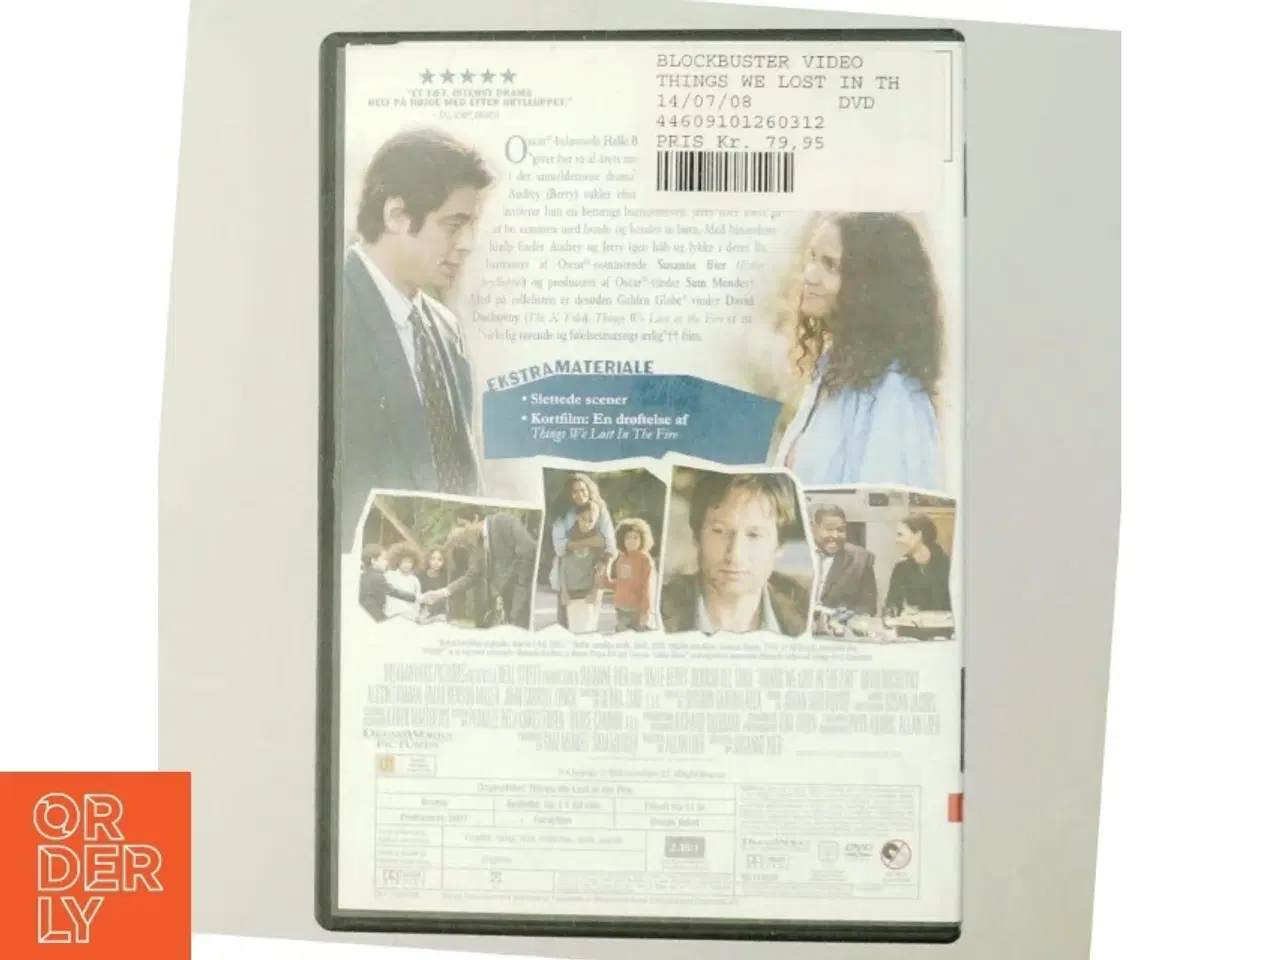 Billede 3 - 'Things We Lost in the Fire (DVD) fra Blockbuster